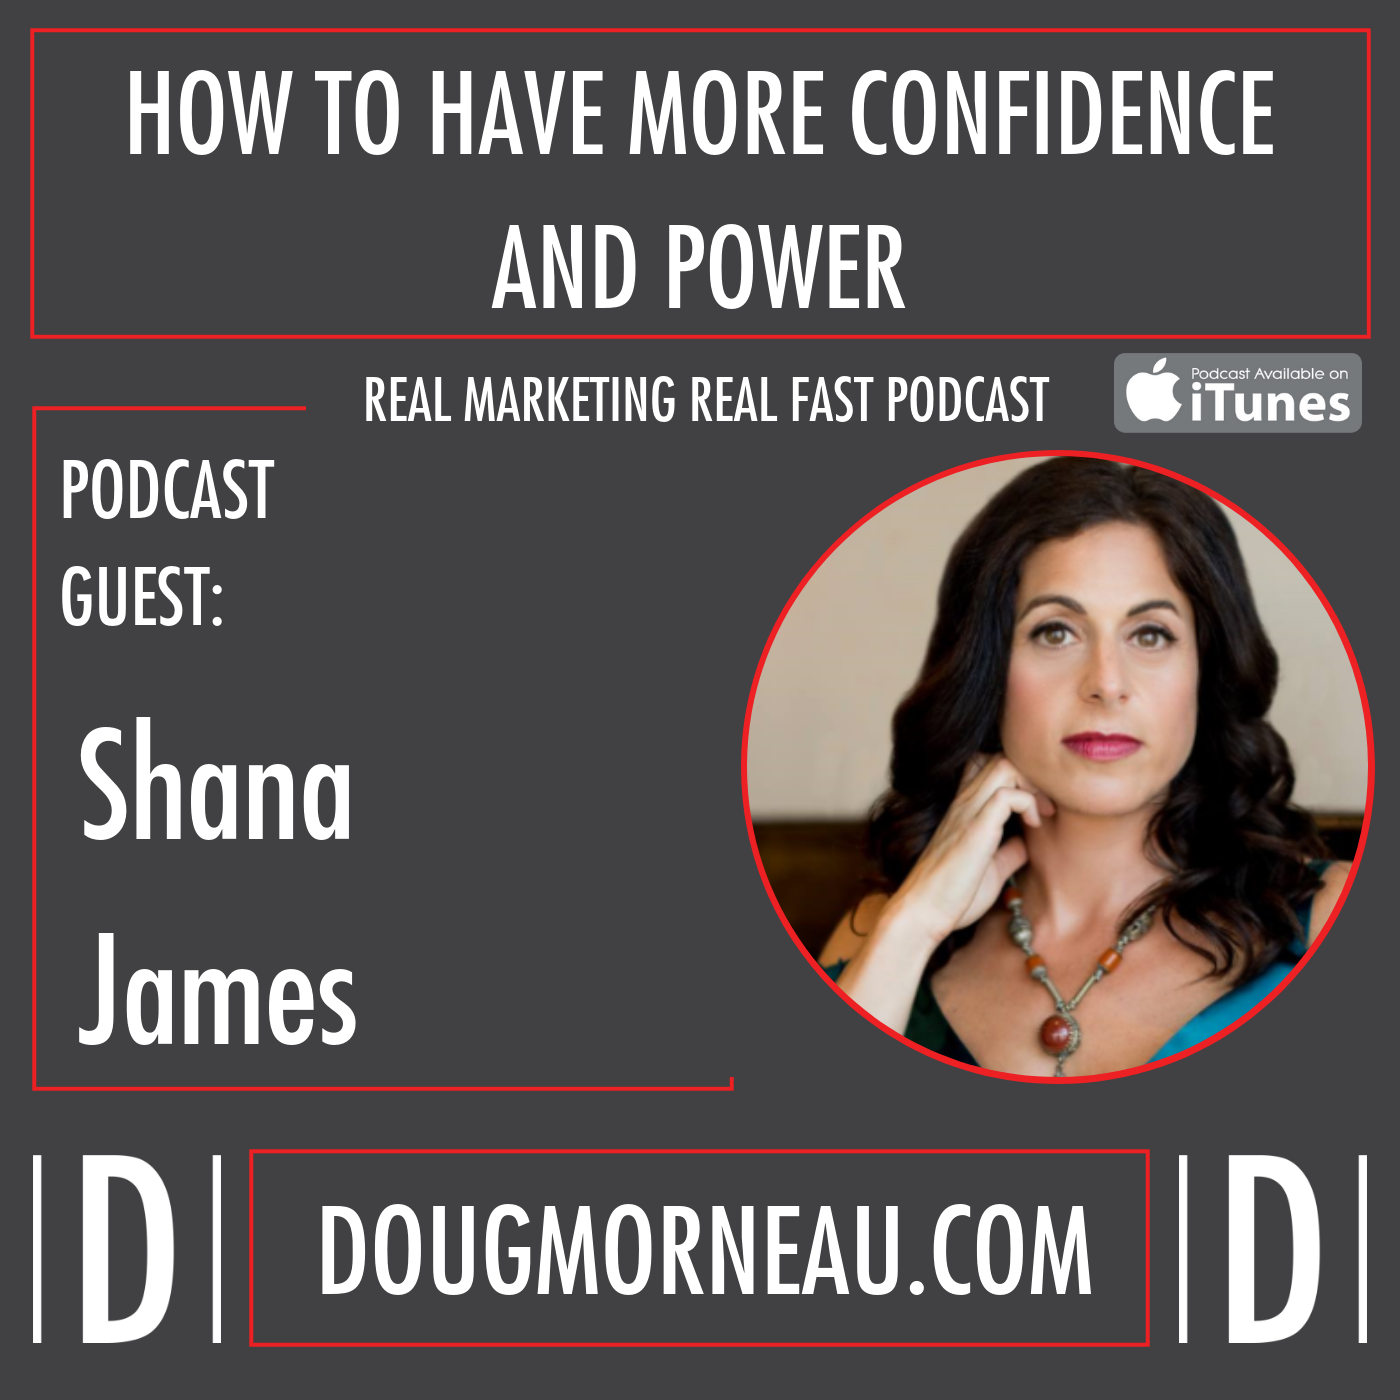 HOW TO HAVE MORE CONFIDENCE AND POWER SHANA JAMES - DOUG MORNEAU - REAL MARKETING REAL FAST PODCAST